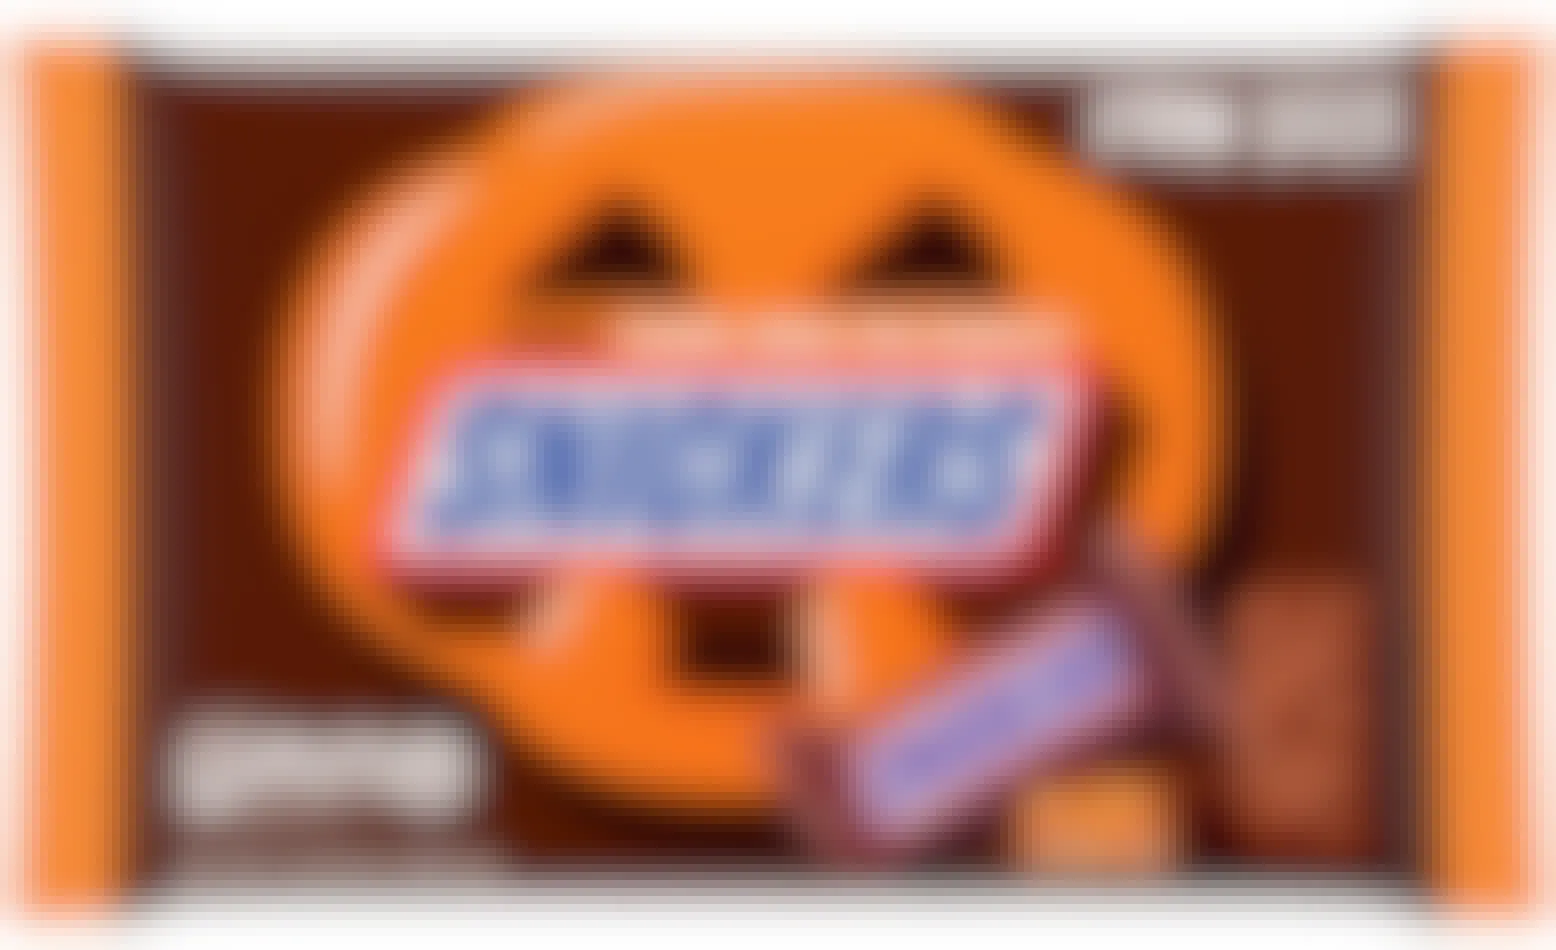 Snickers candy bar bag